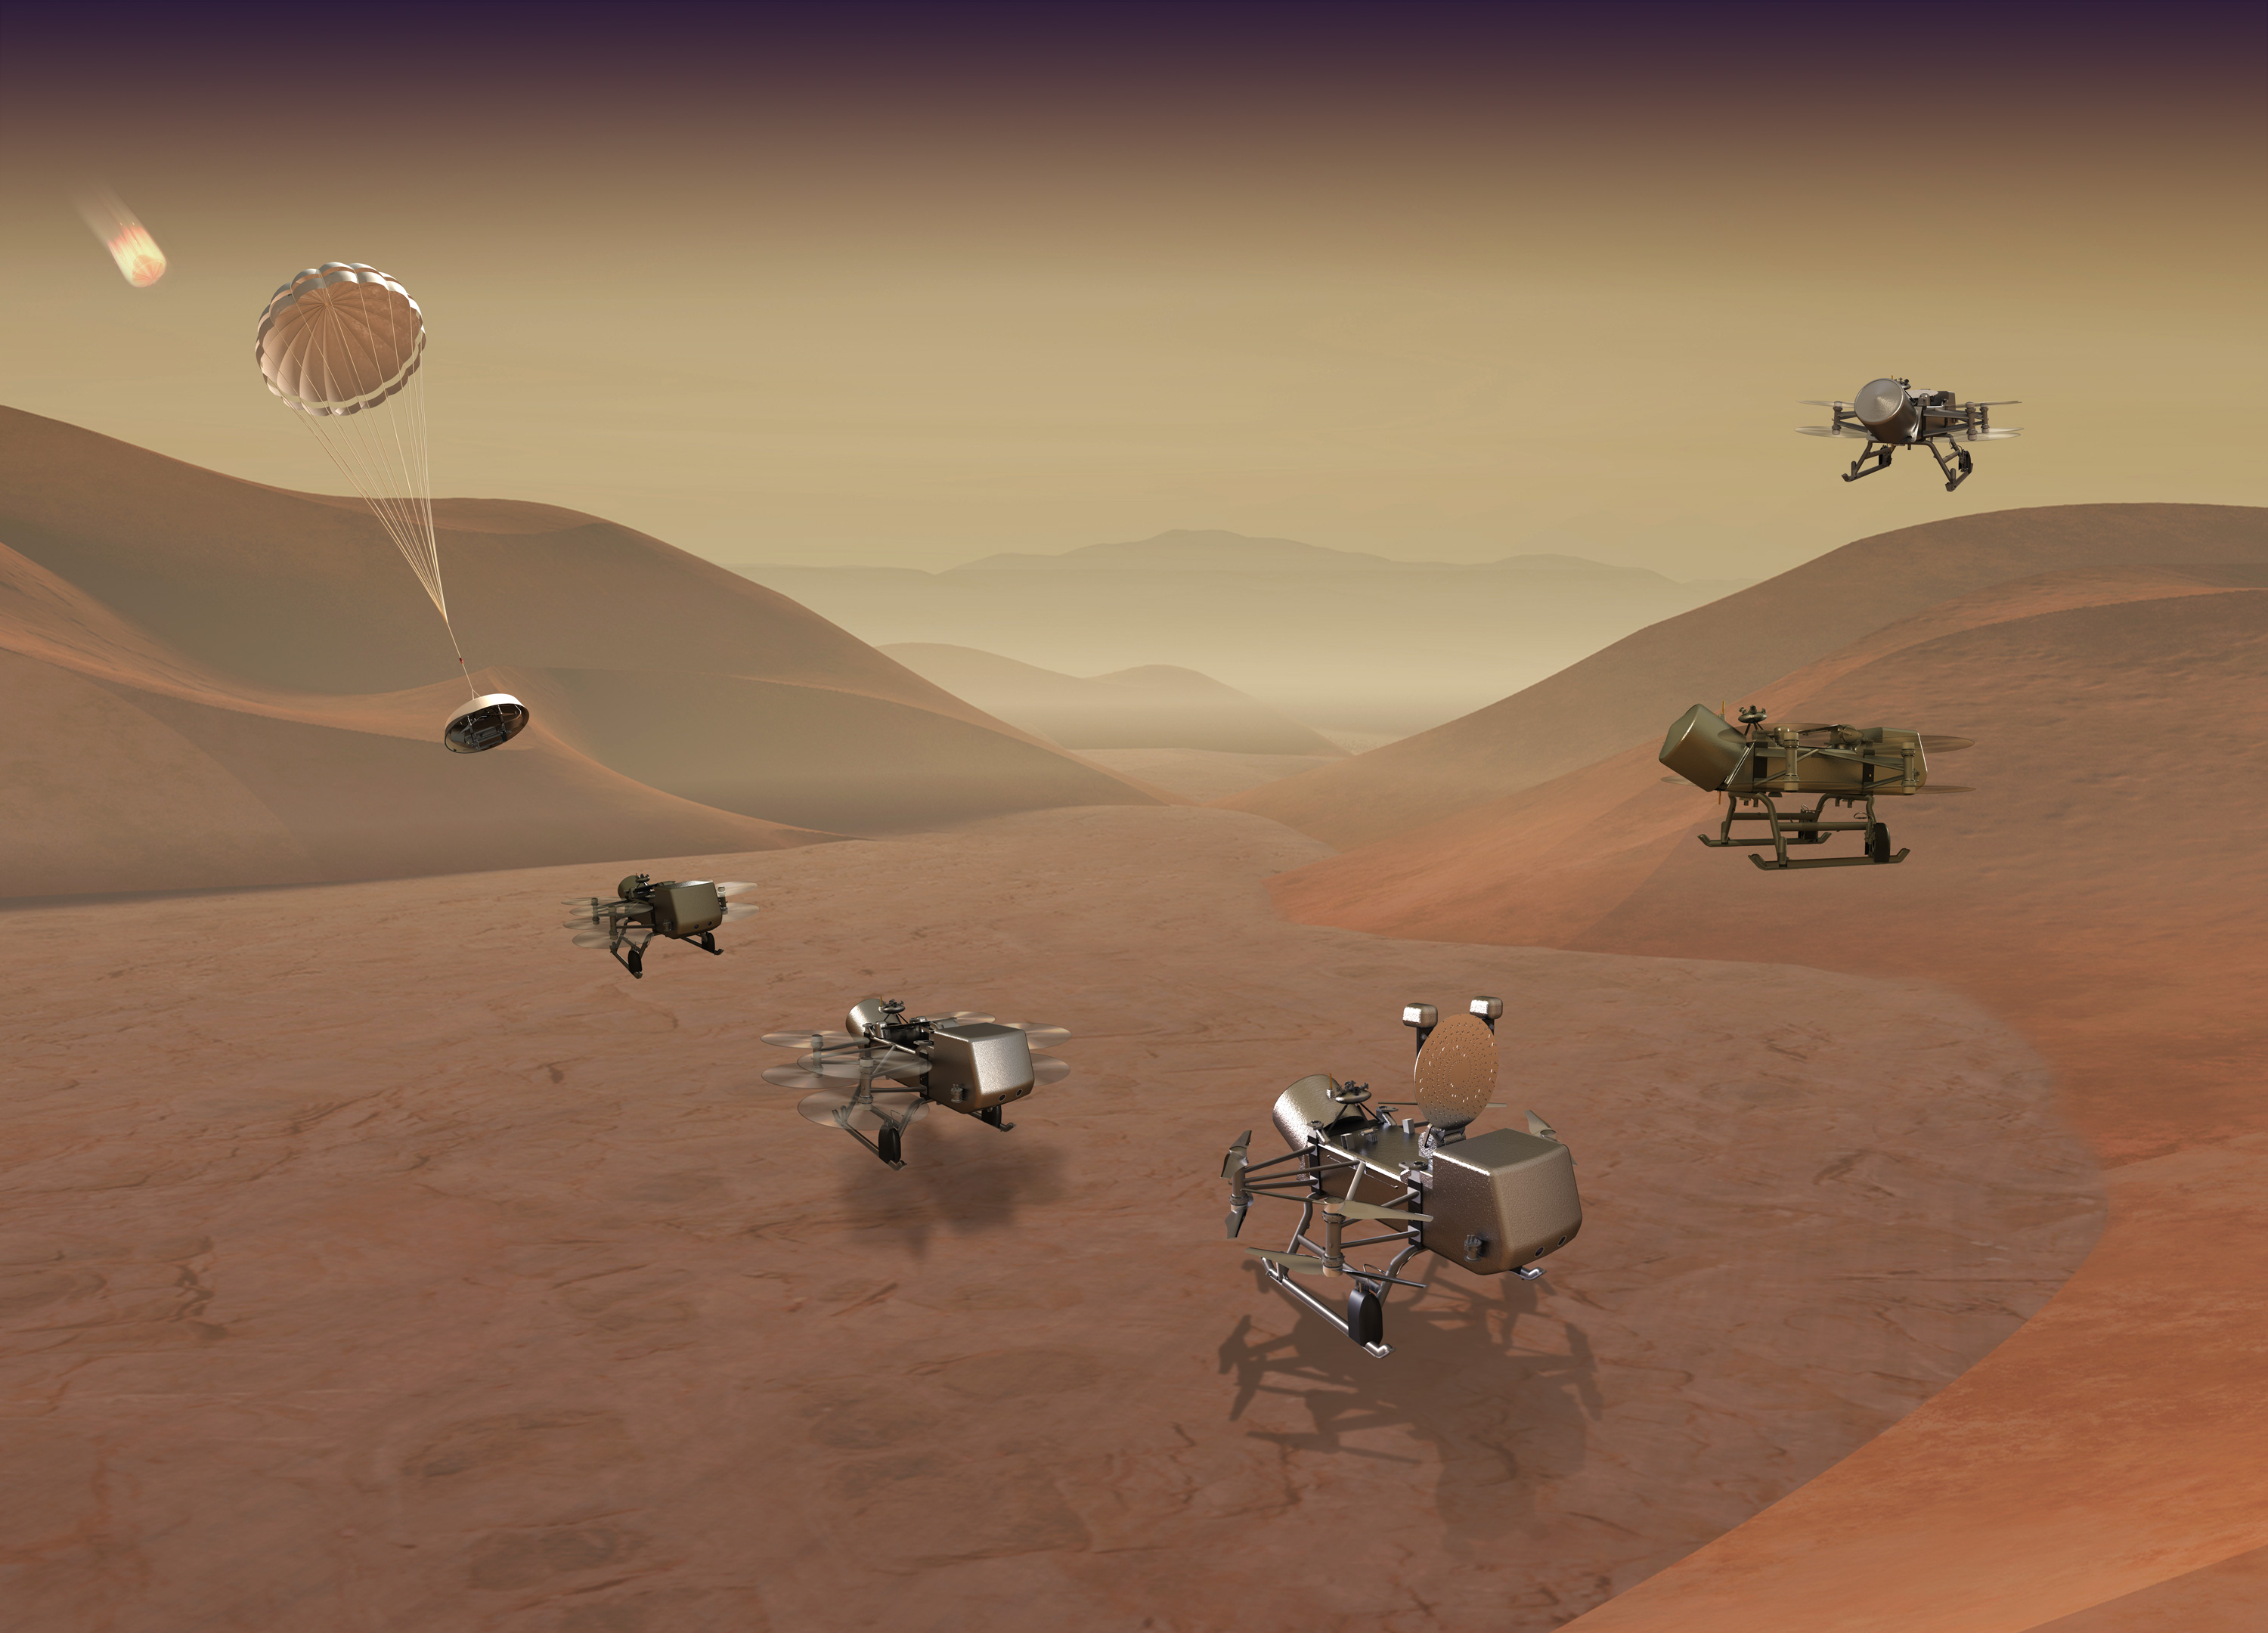 Illustration of Dragonfly landing and flying over Titan's surface